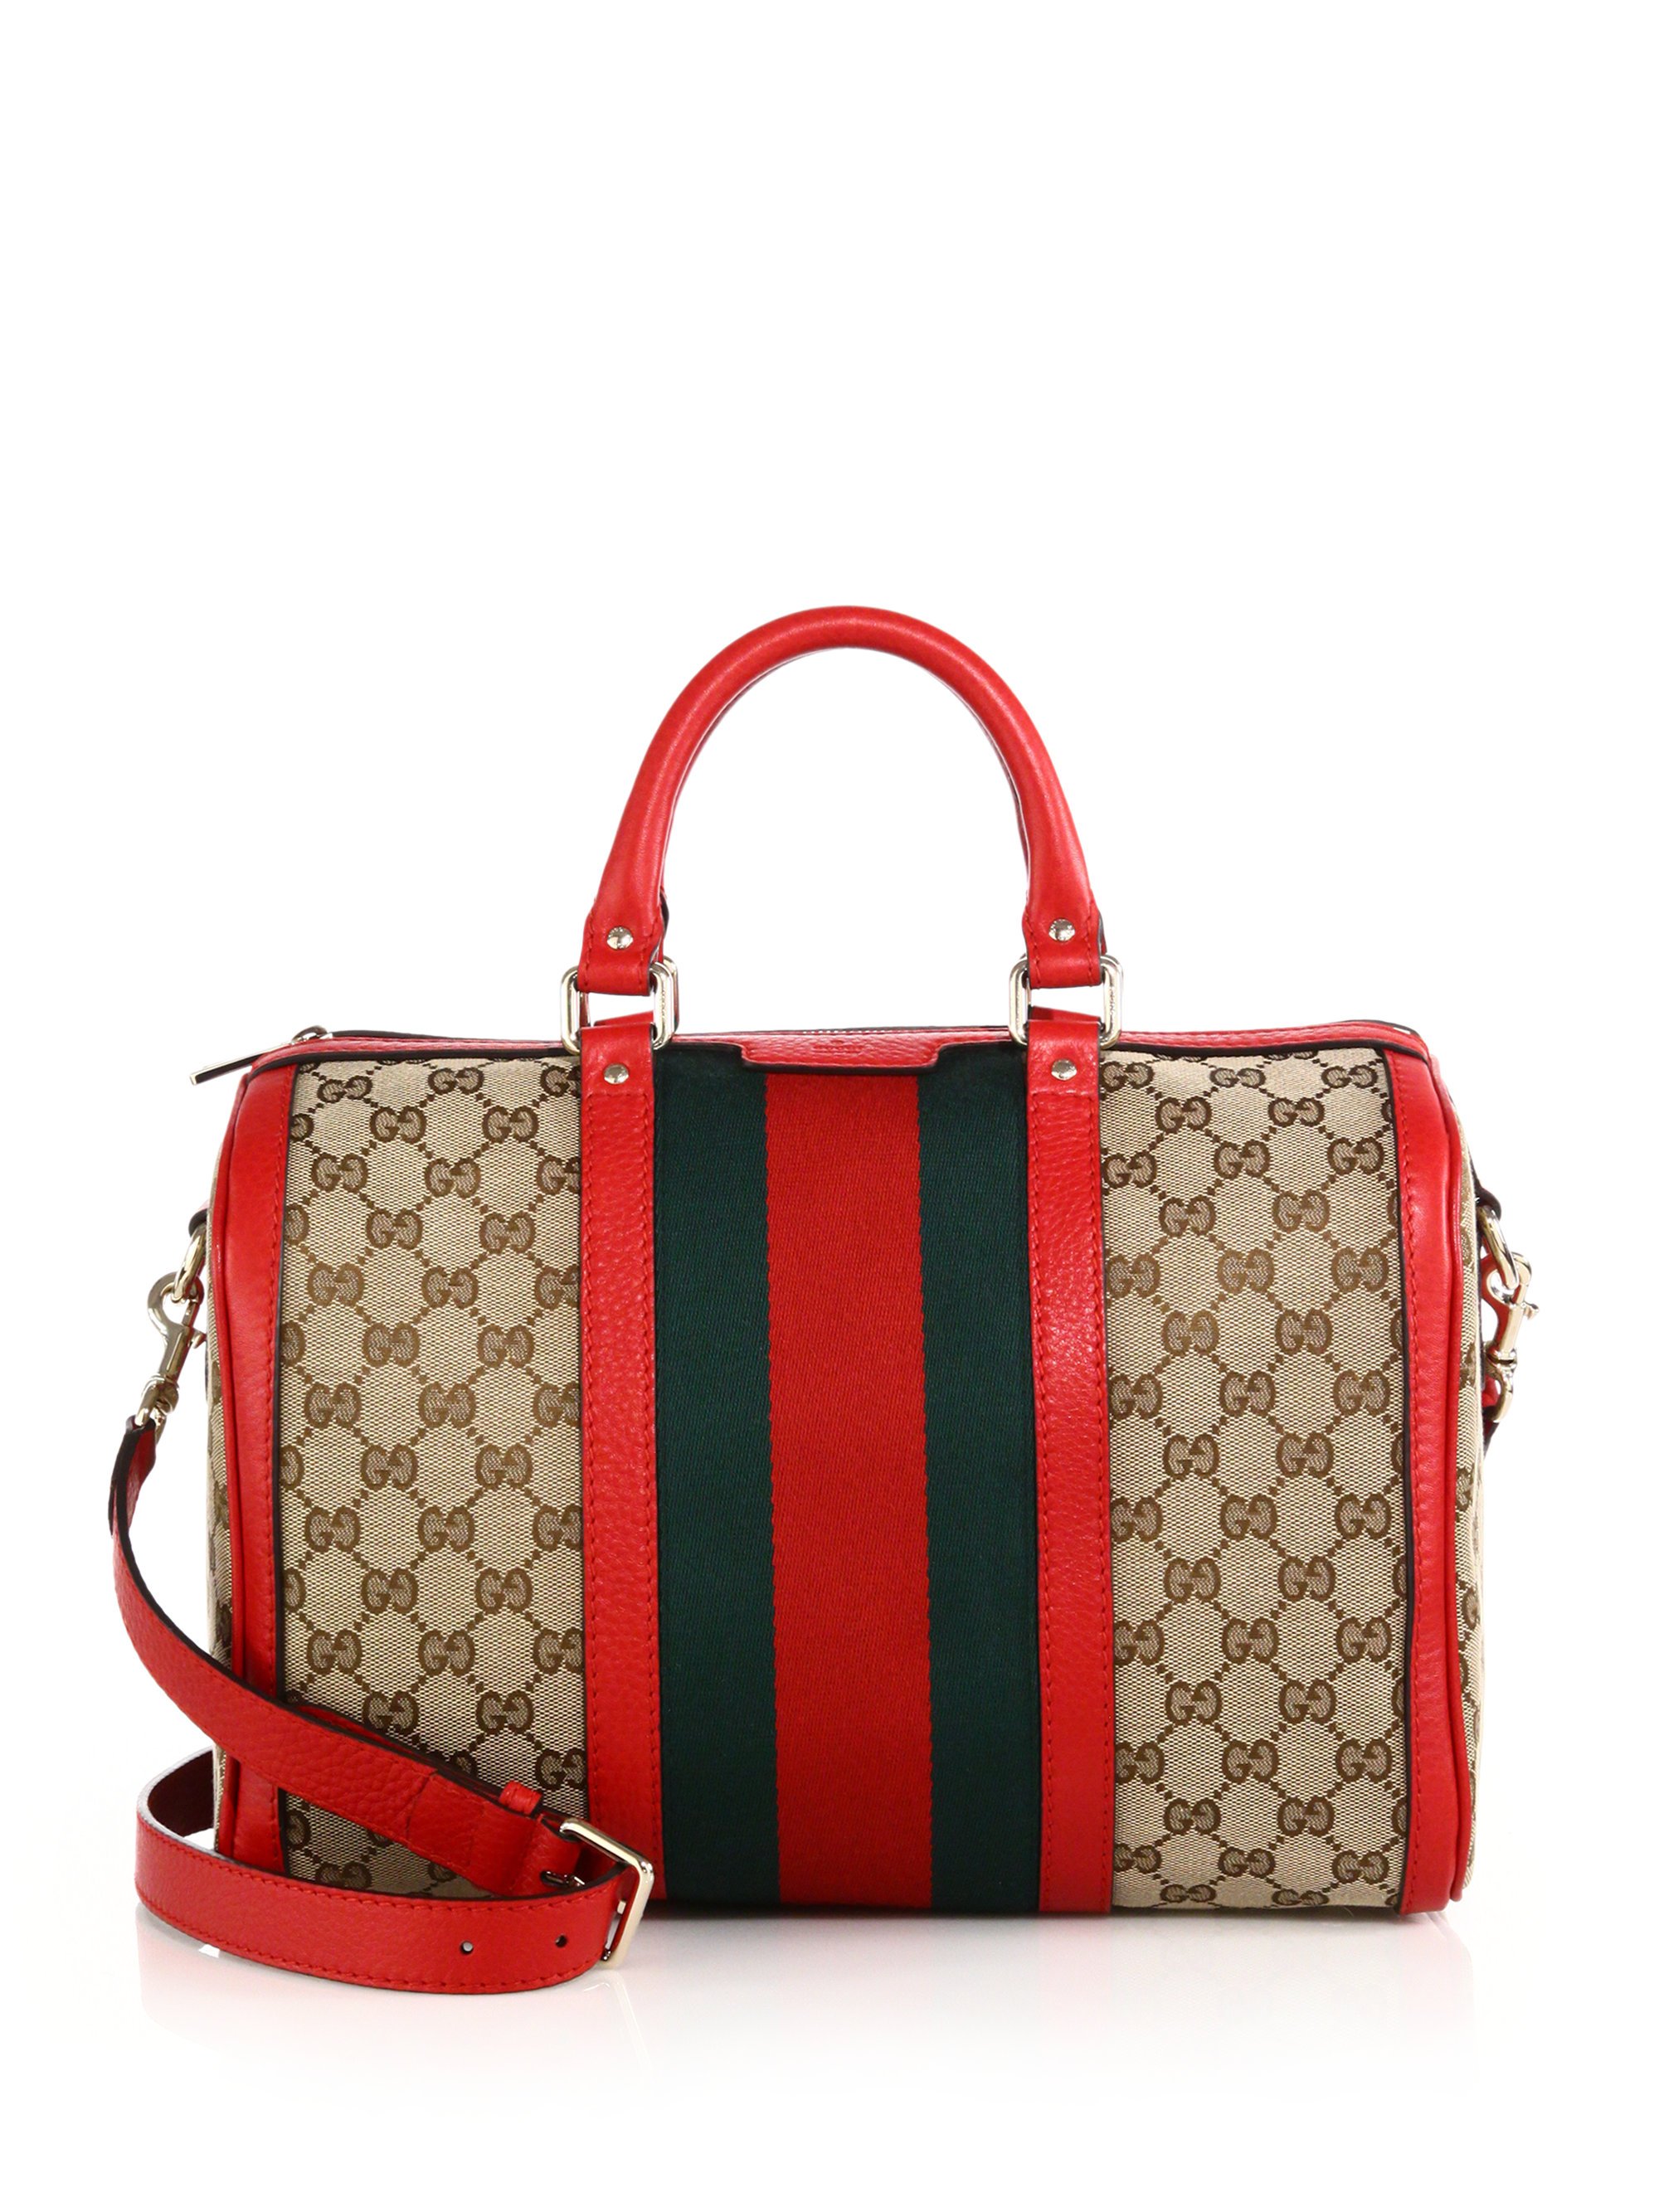 Vintage Red/Burgundy Authentic Gucci Bag 067